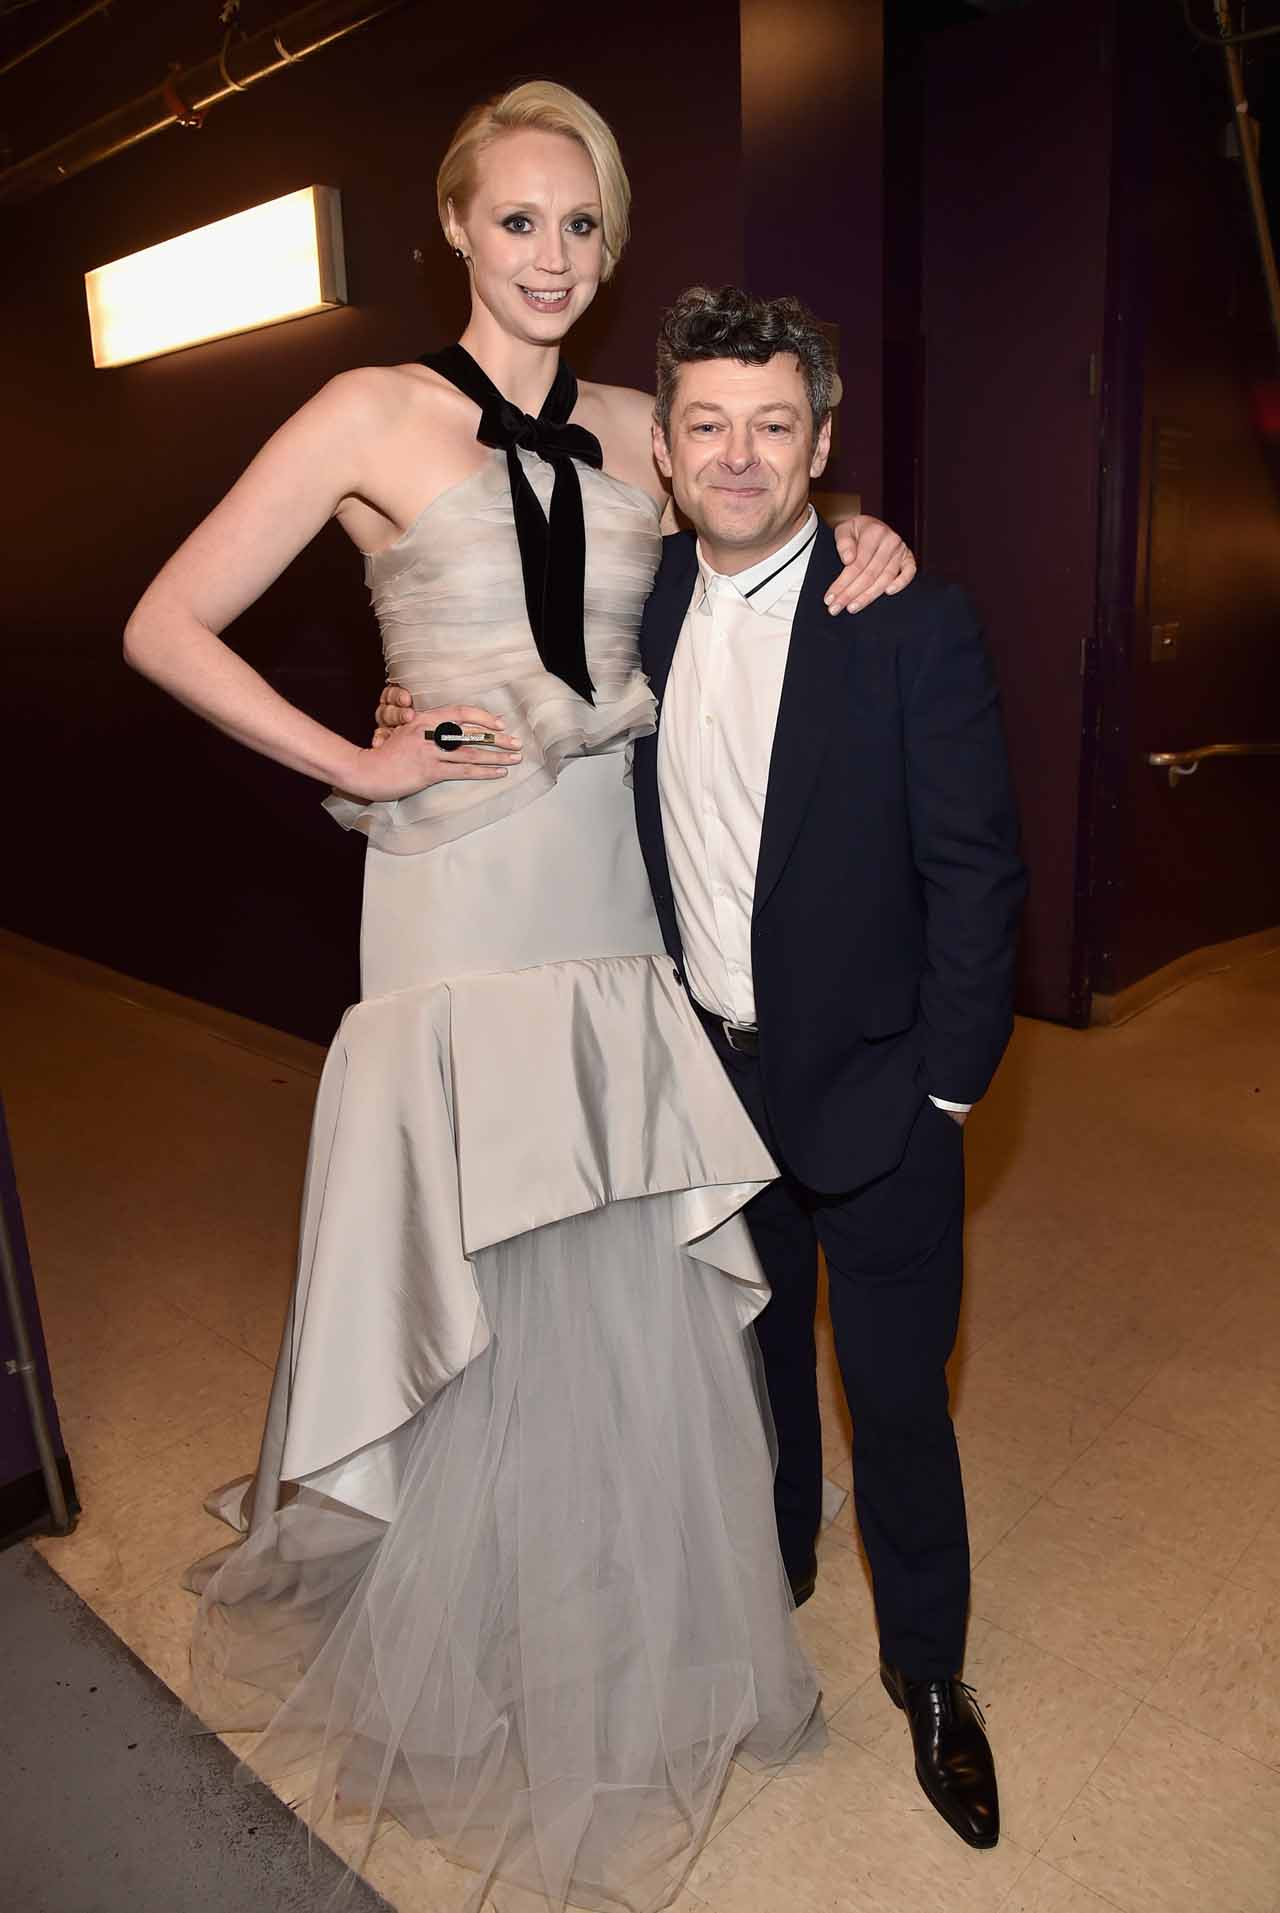 HOLLYWOOD, CA - DECEMBER 14:  Actors Gwendoline Christie (L) and Andy Serkis attend the World Premiere of ?Star Wars: The Force Awakens? at the Dolby, El Capitan, and TCL Theatres on December 14, 2015 in Hollywood, California.  (Photo by Alberto E. Rodriguez/Getty Images for Disney) *** Local Caption *** Gwendoline Christie;Andy Serkis